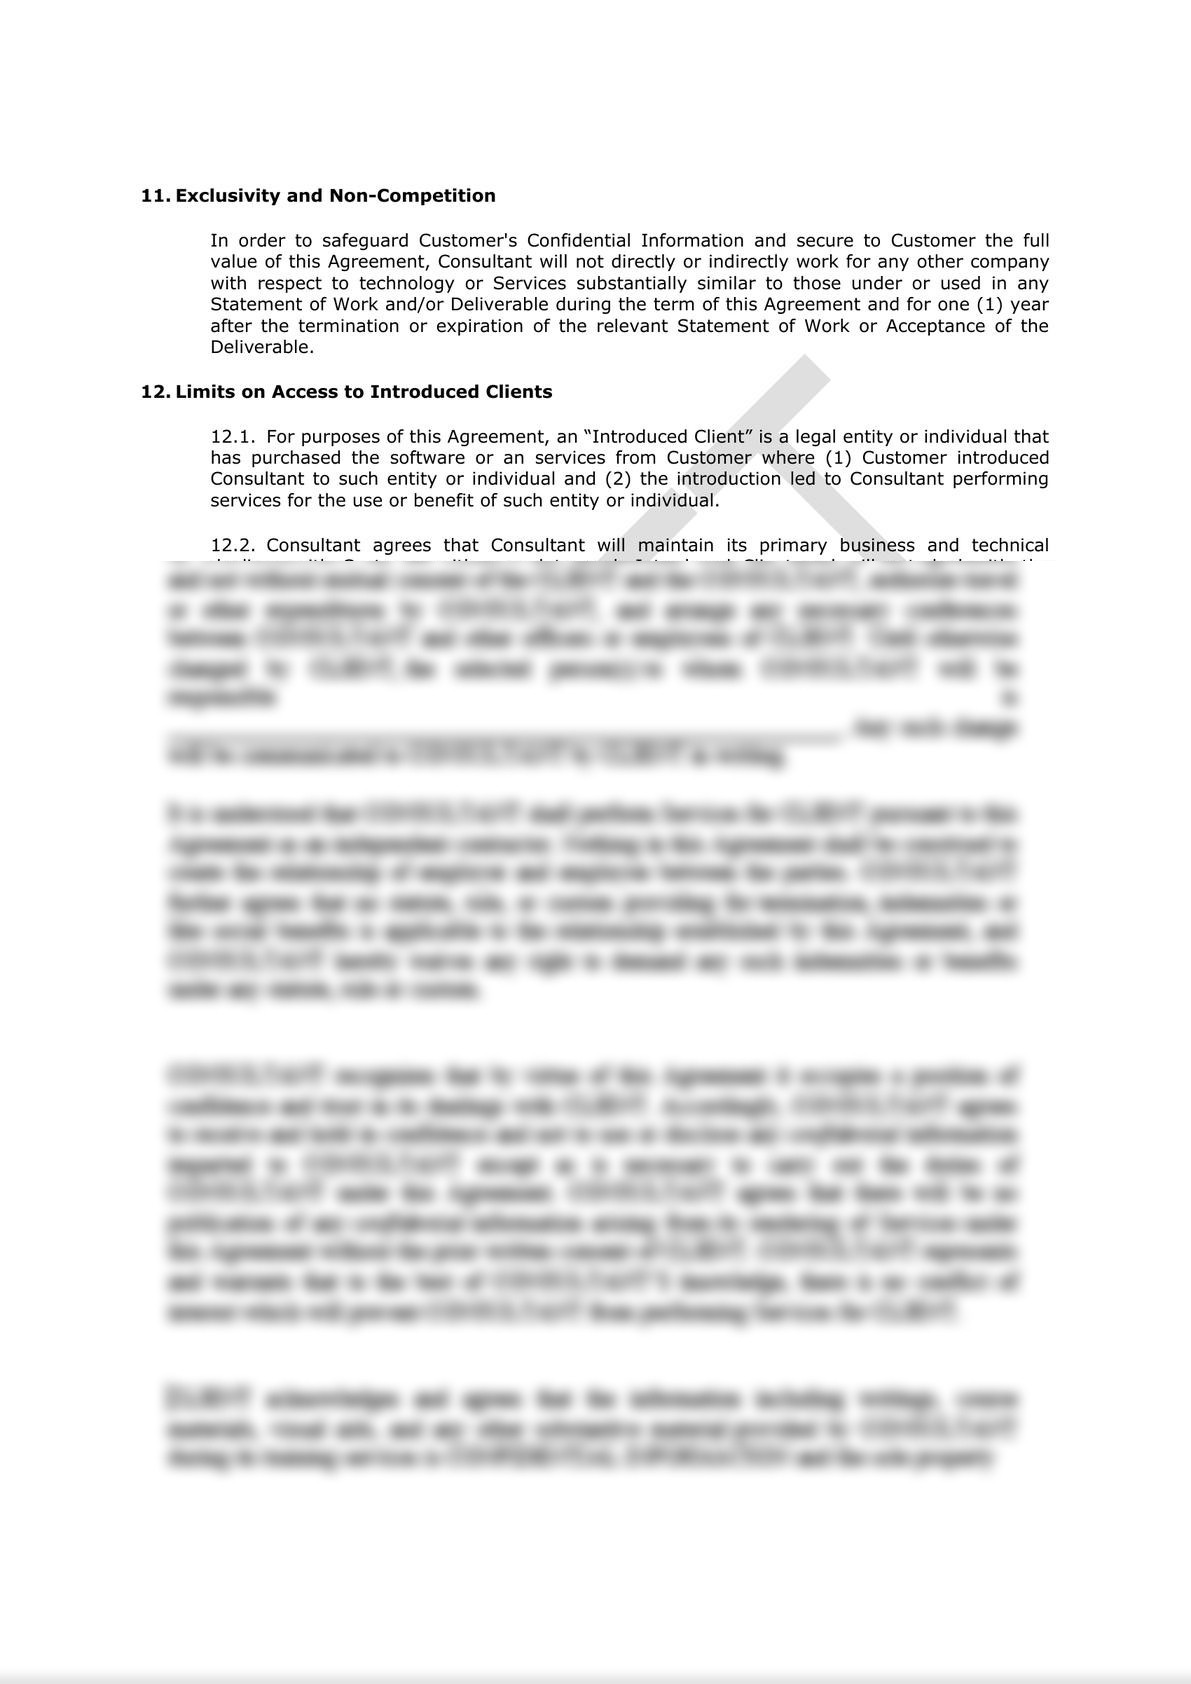 Software Consulting Agreement (Pro-Customer)-5